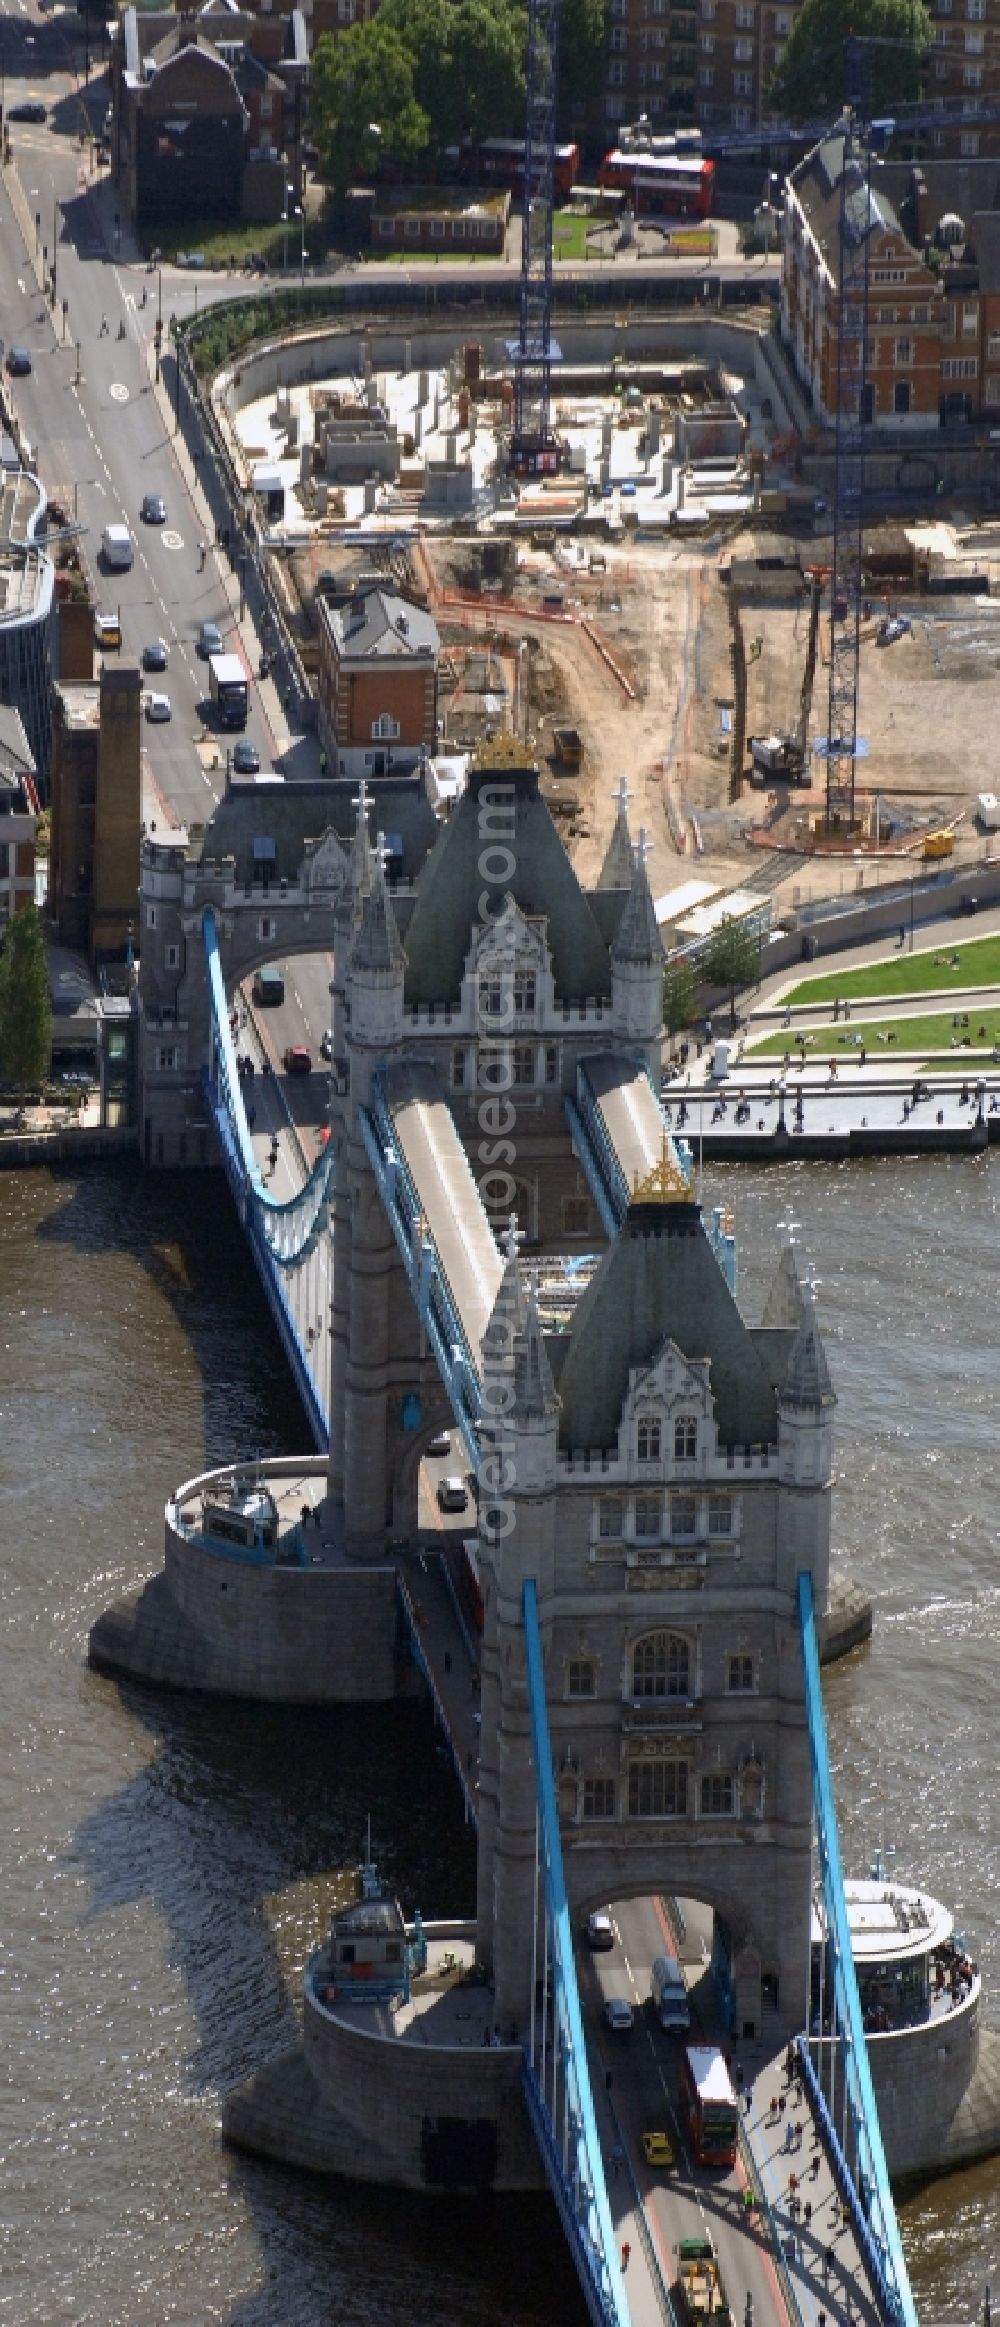 Aerial photograph London - View of Tower Bridge on the banks of the Thames - the symbol of London